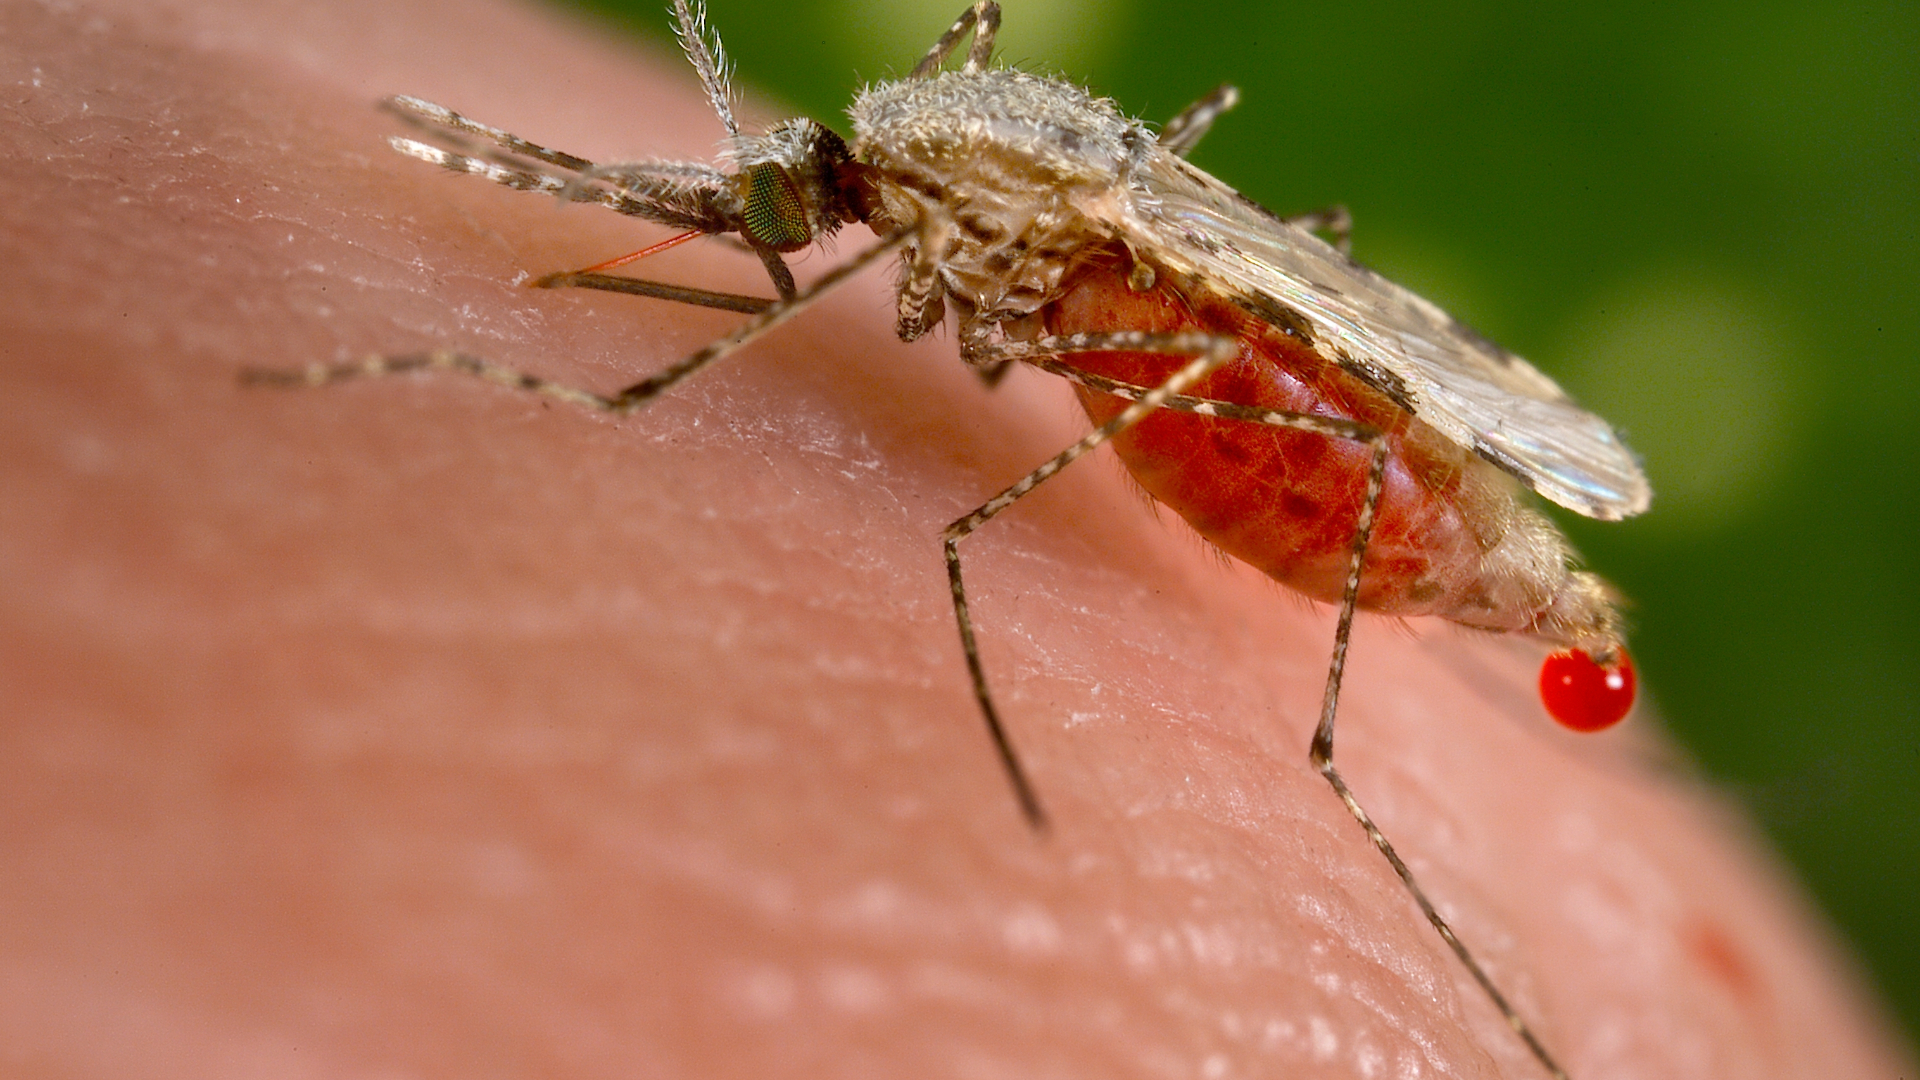 Stop mosquitoes from 'bug'ging you with these tips